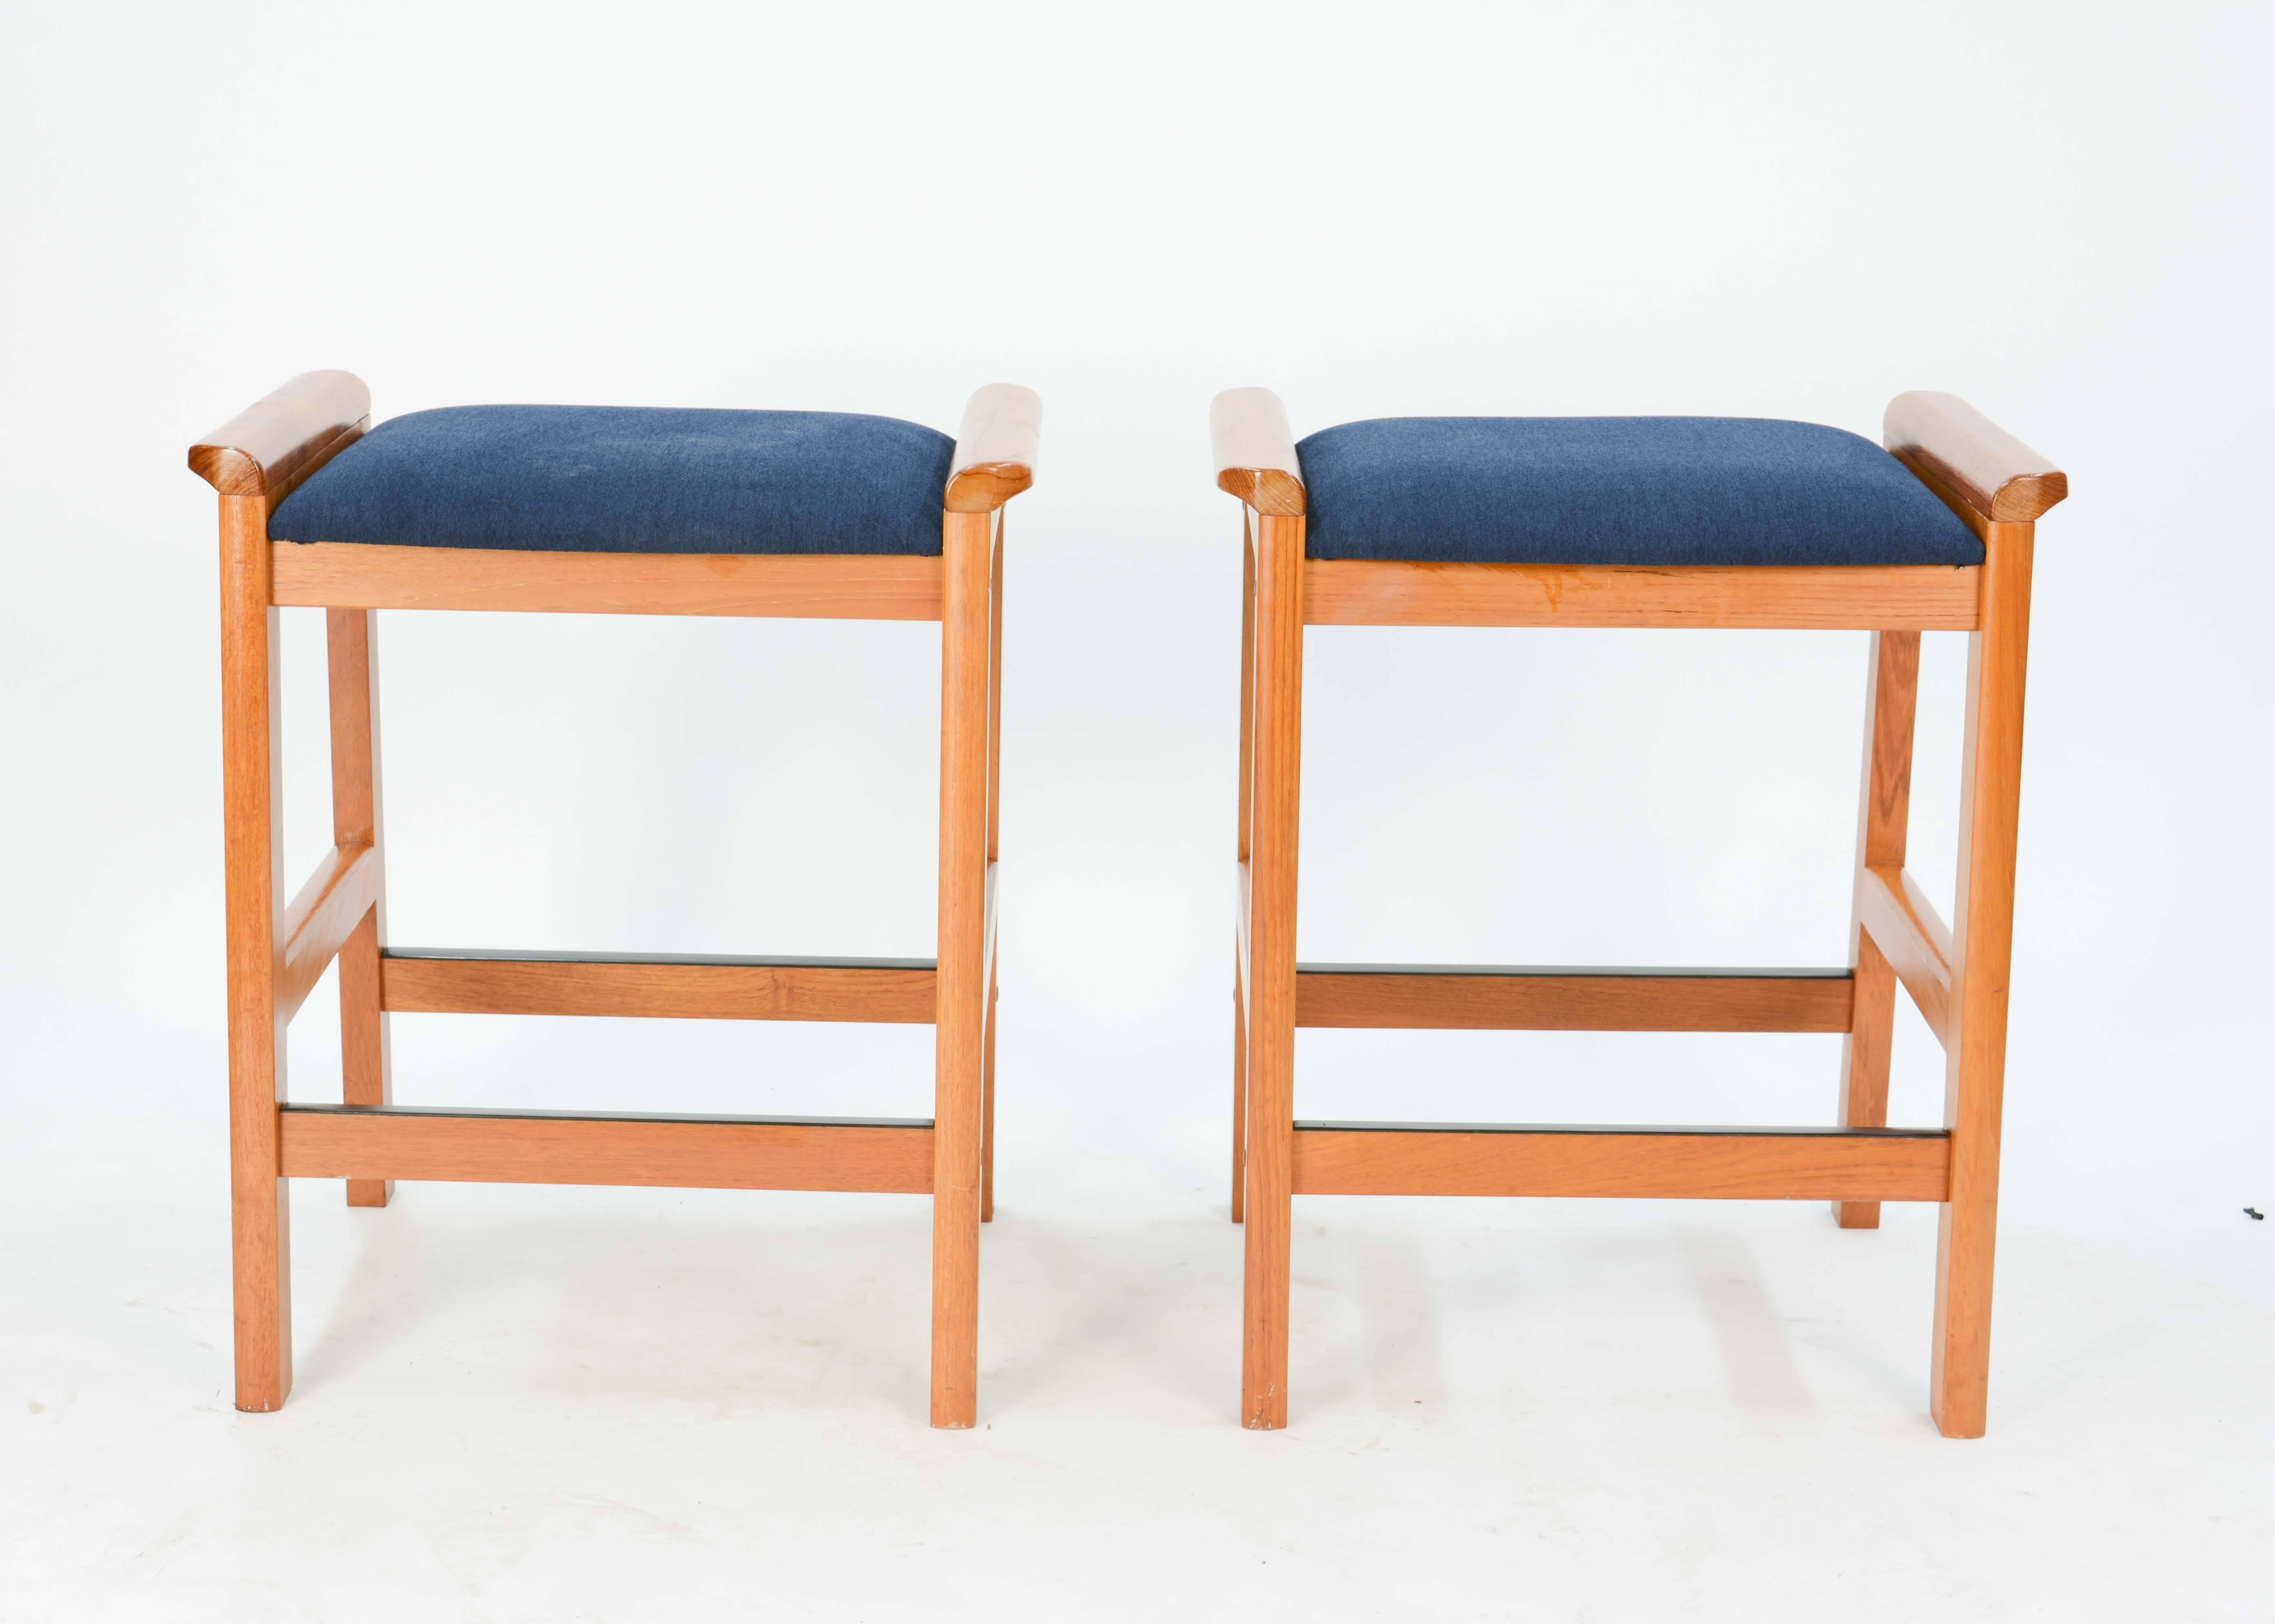 A Pair of J.L. Moller-Hojbjerg Danish Modern Bar Stools with new Royal Blue Fabric.  These stools feature the flair side handles and foot rest.